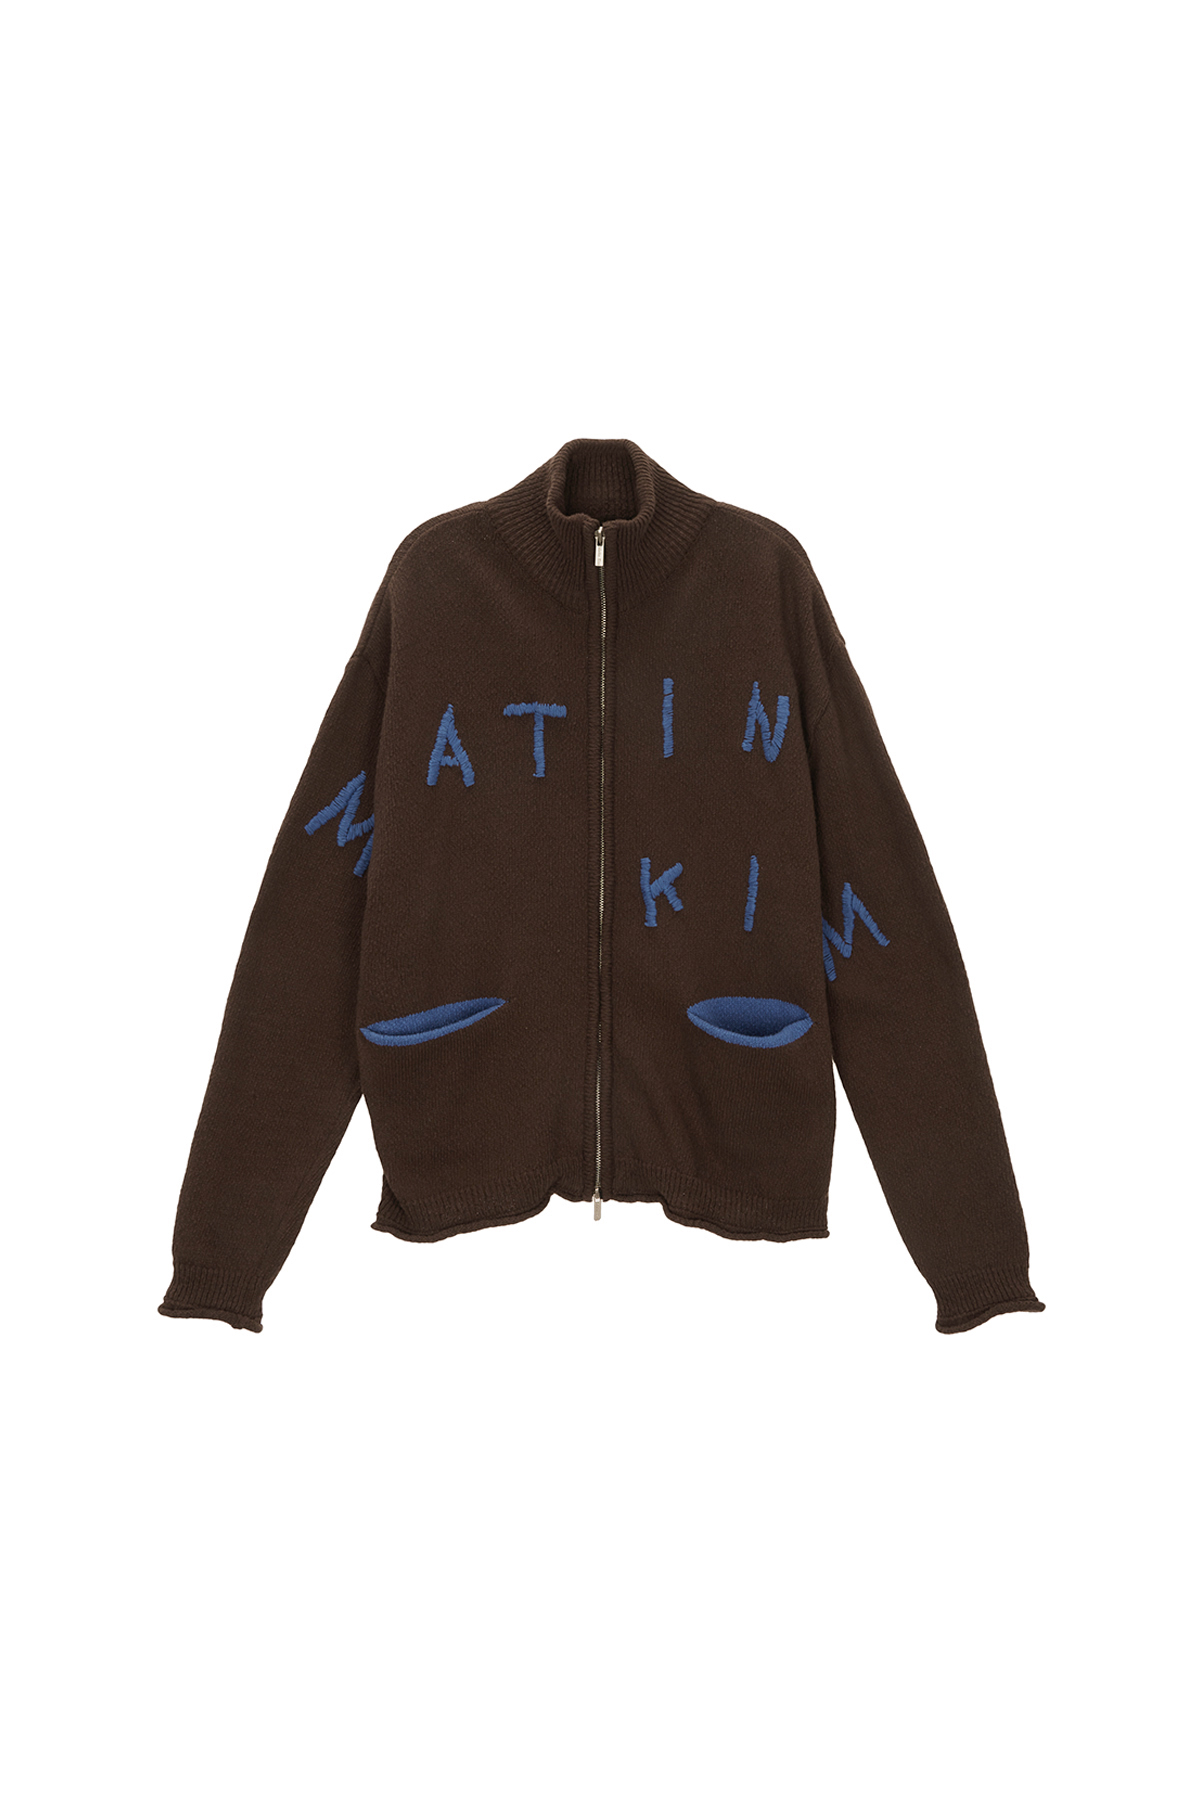 EMBROIDERY LOGO KNIT ZIP UP IN BROWN